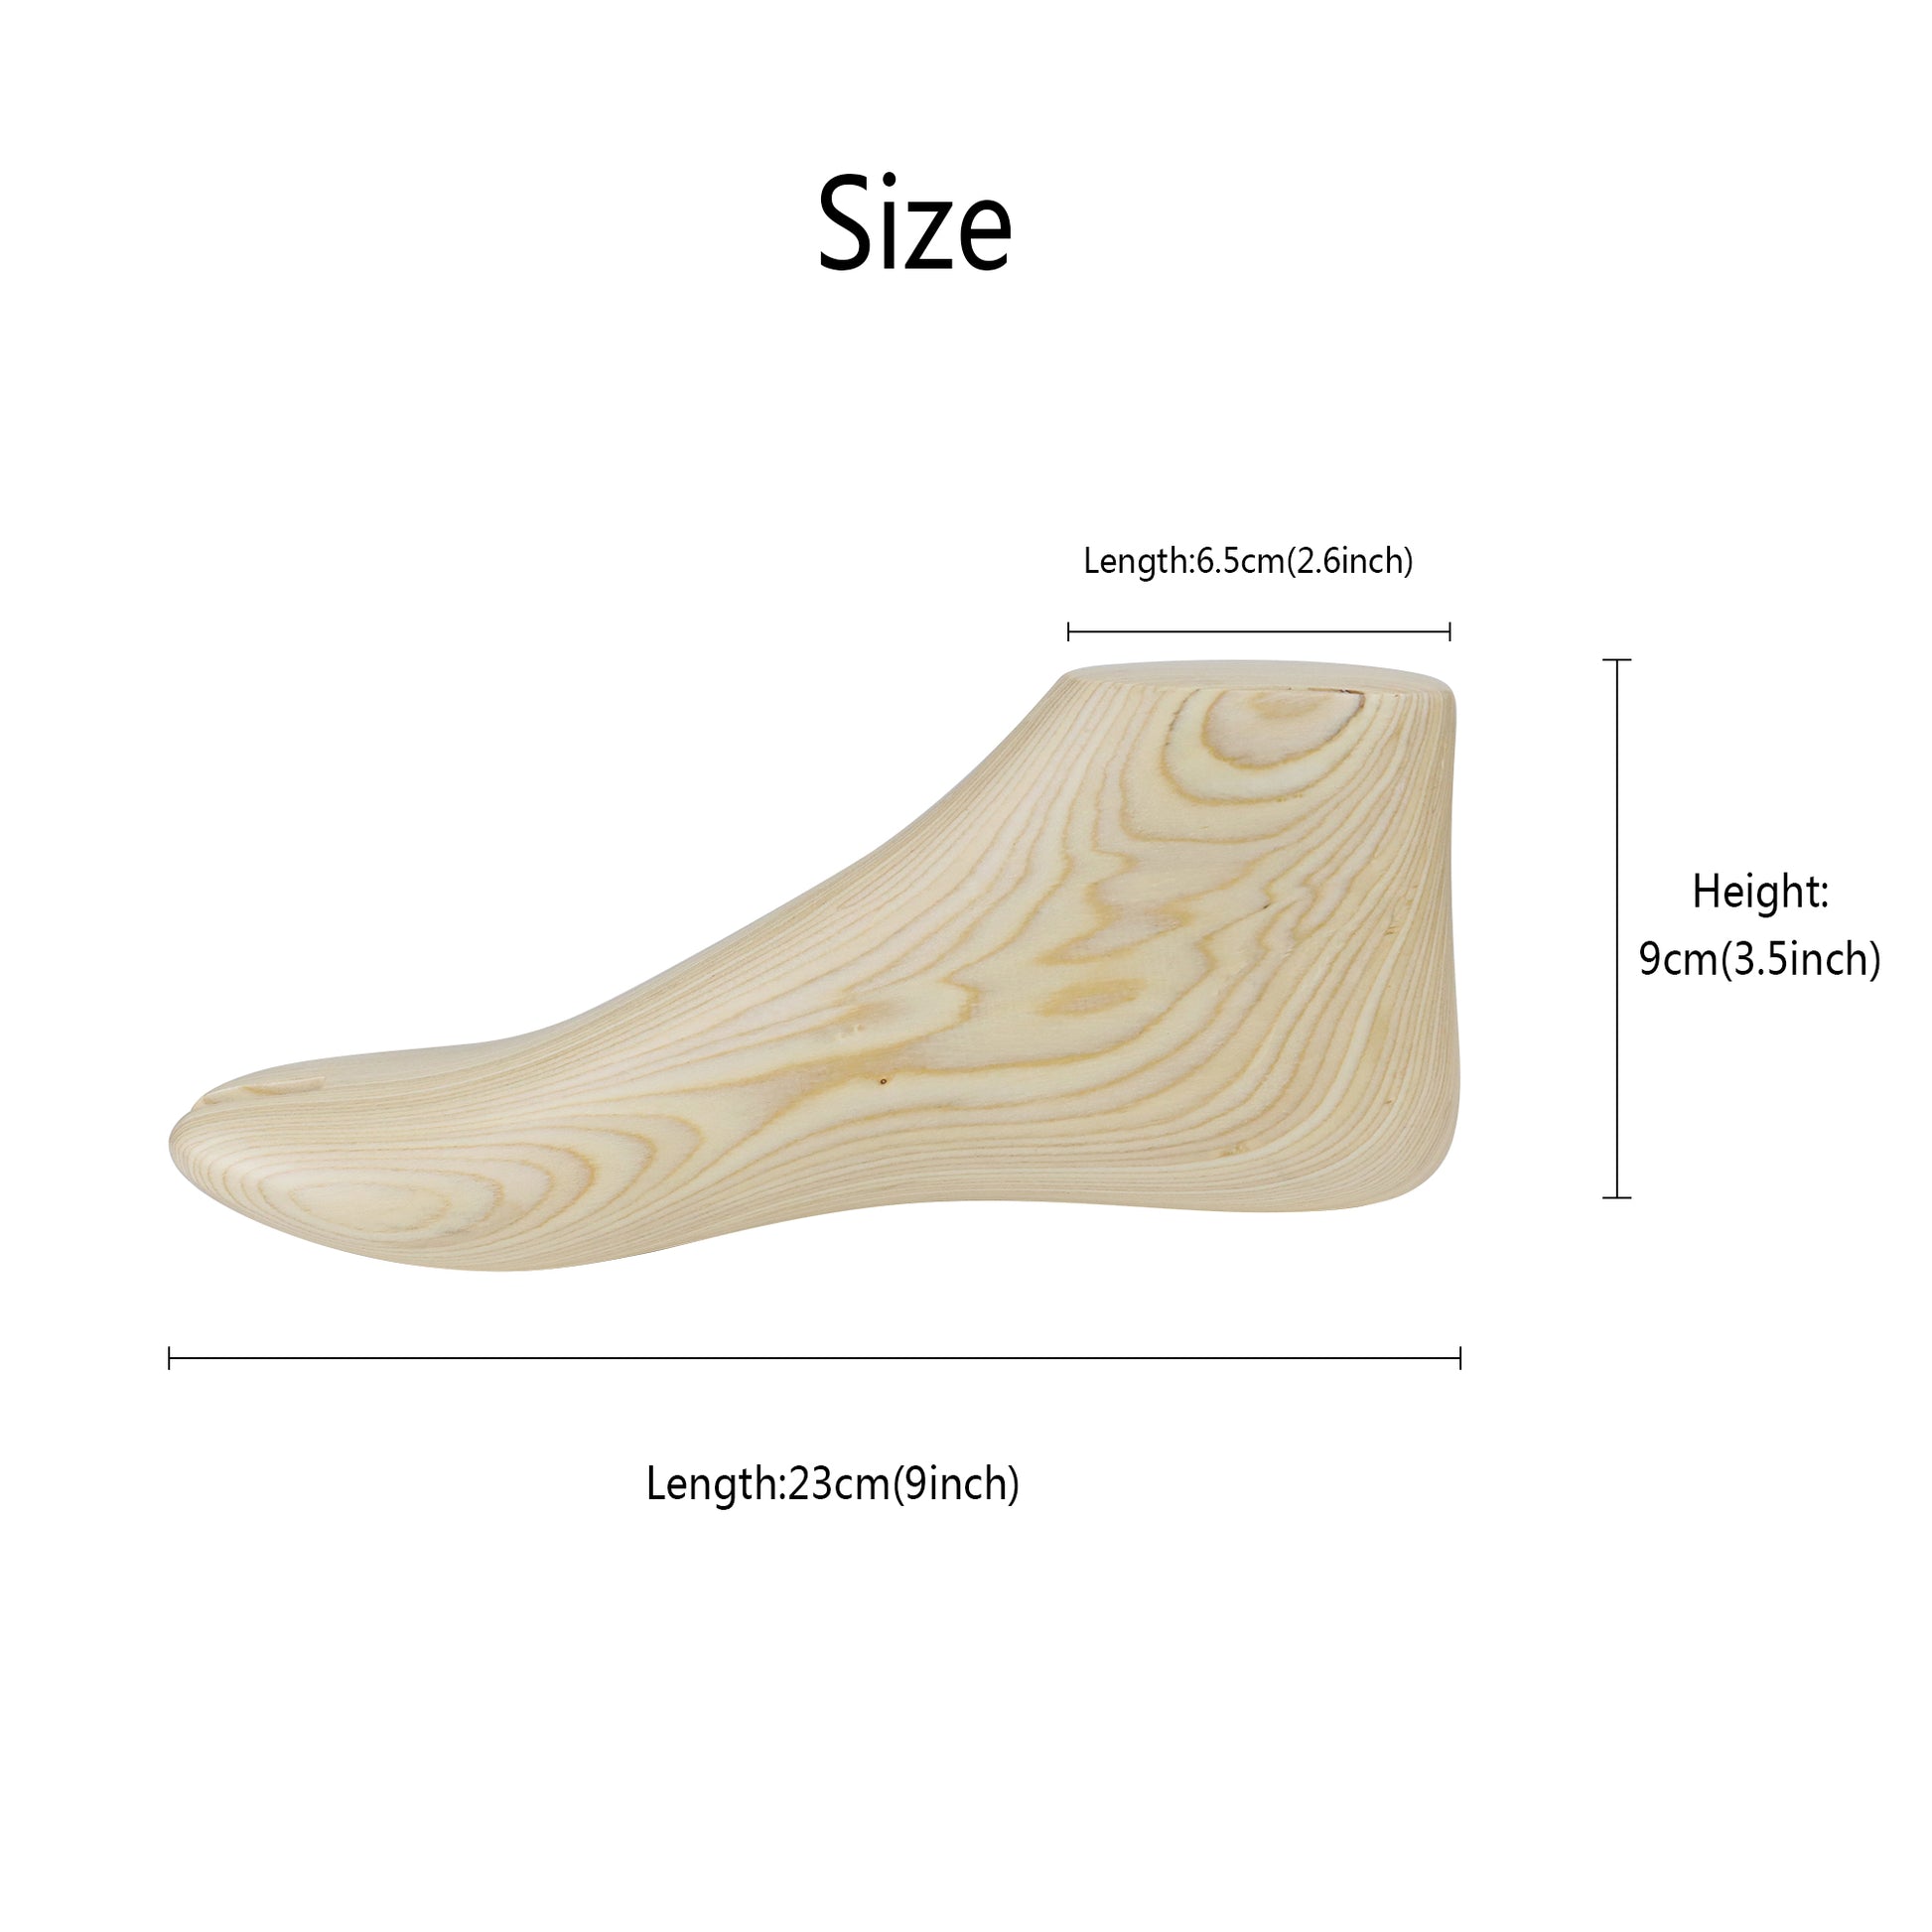 Female Wooden Foot Mannequin, Solid Feet Dress Forms Model for Shoes/Socks Window Rack Display,High-end 9 inch Mannequin Foot Torso, Toe DE-LIANG